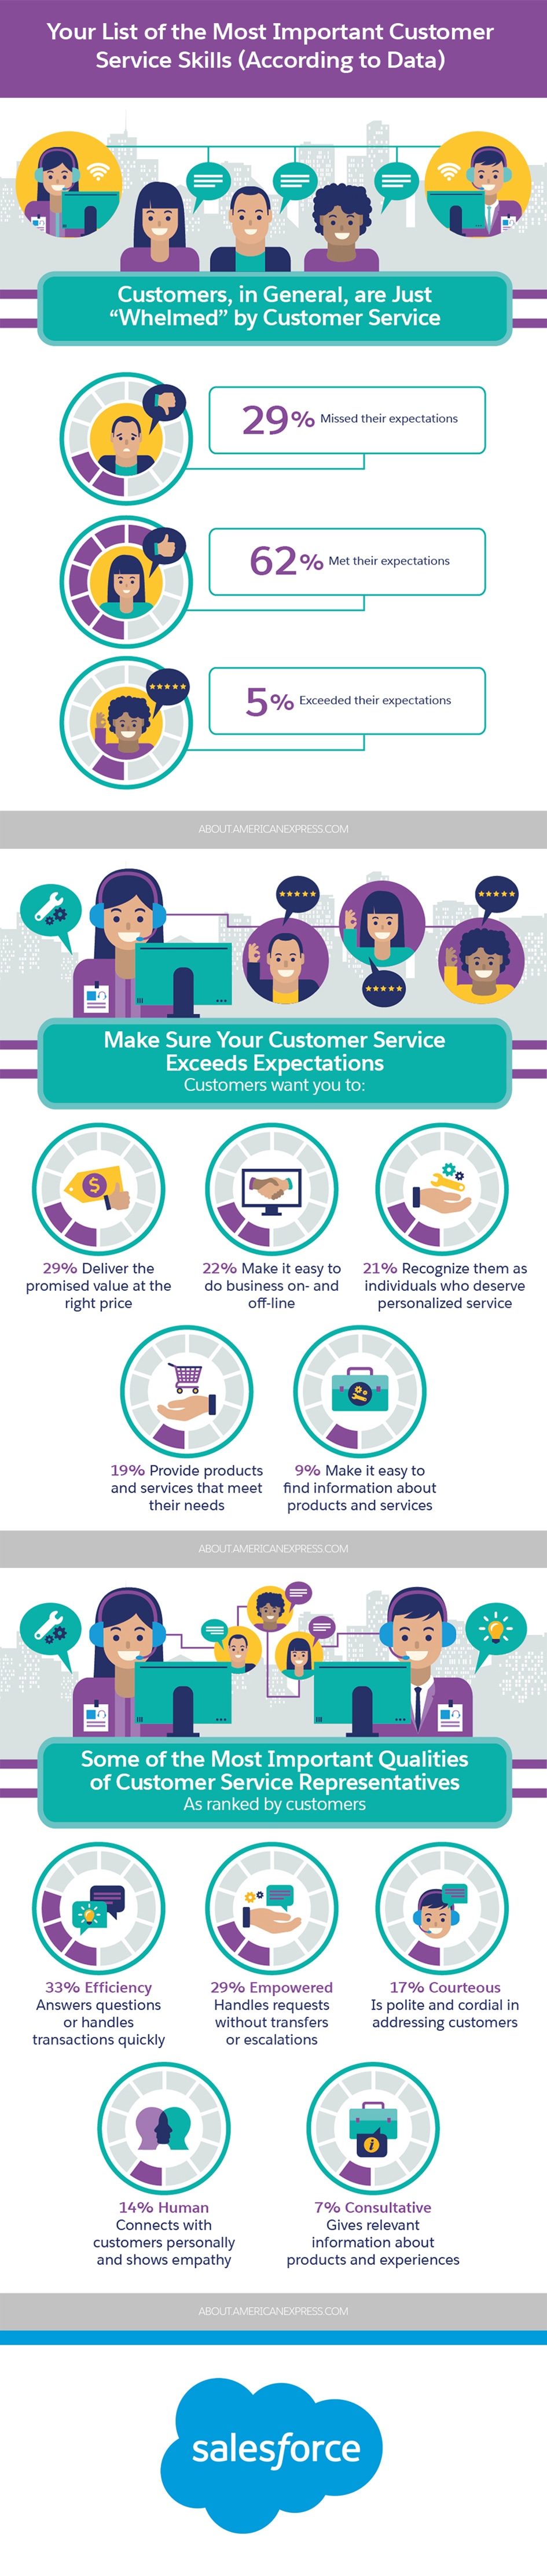 Your List Of The Most Important Customer Service Skills According